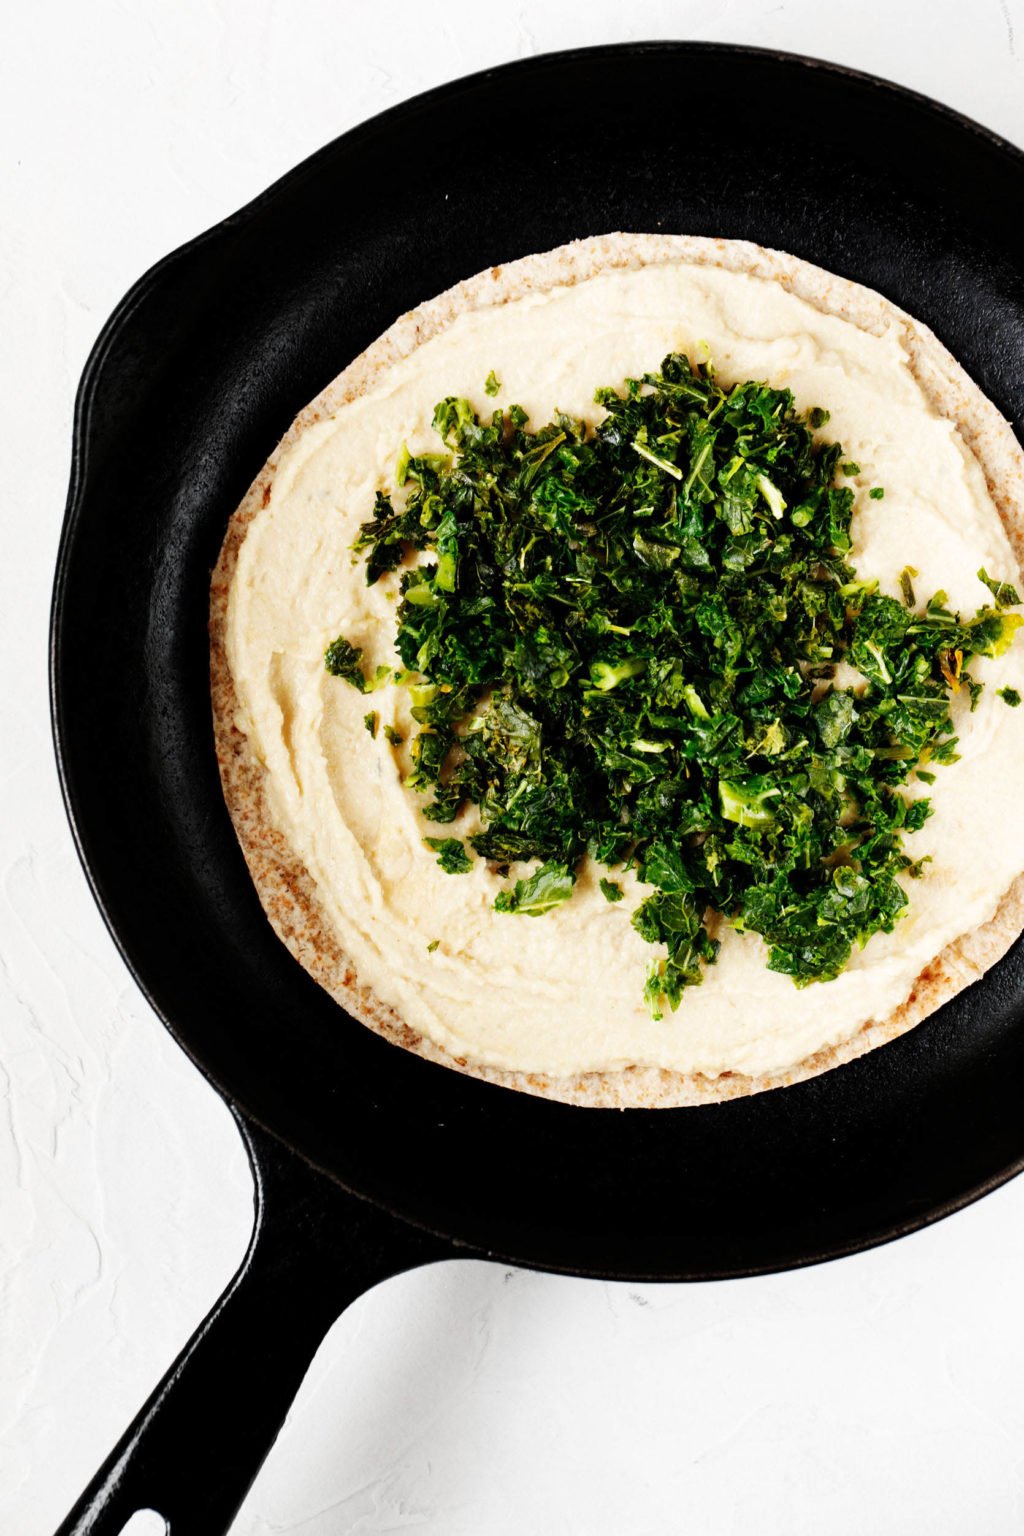 A tortilla is being heated up in a black, round skillet with plant-based ingredients.